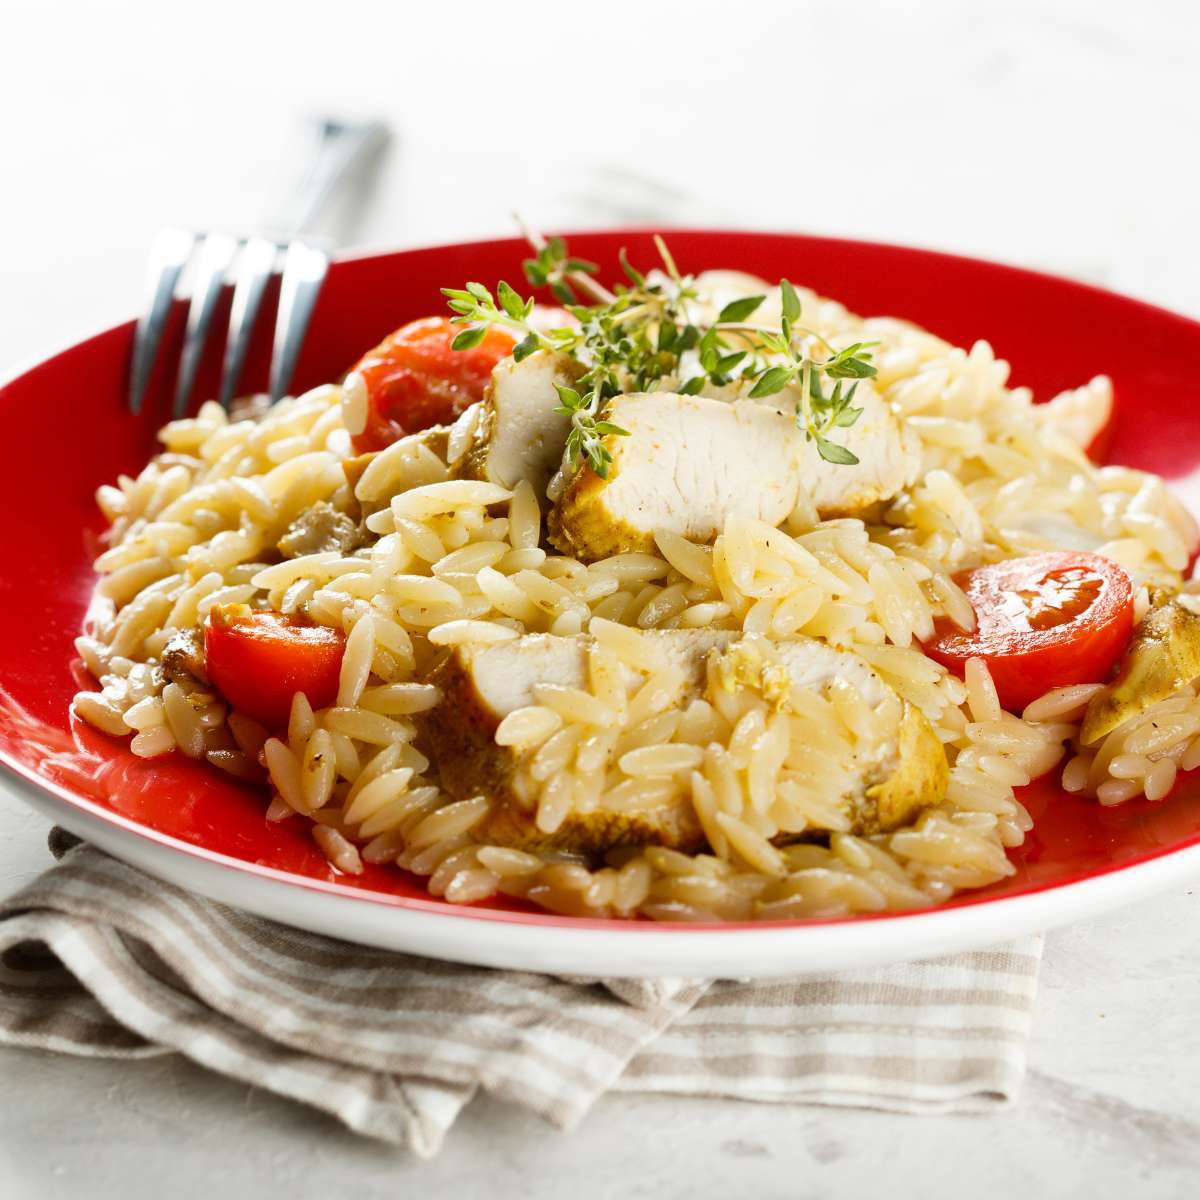 Orzo pasta with chicken, tomatoes and greens with a fork in a plate on a table
